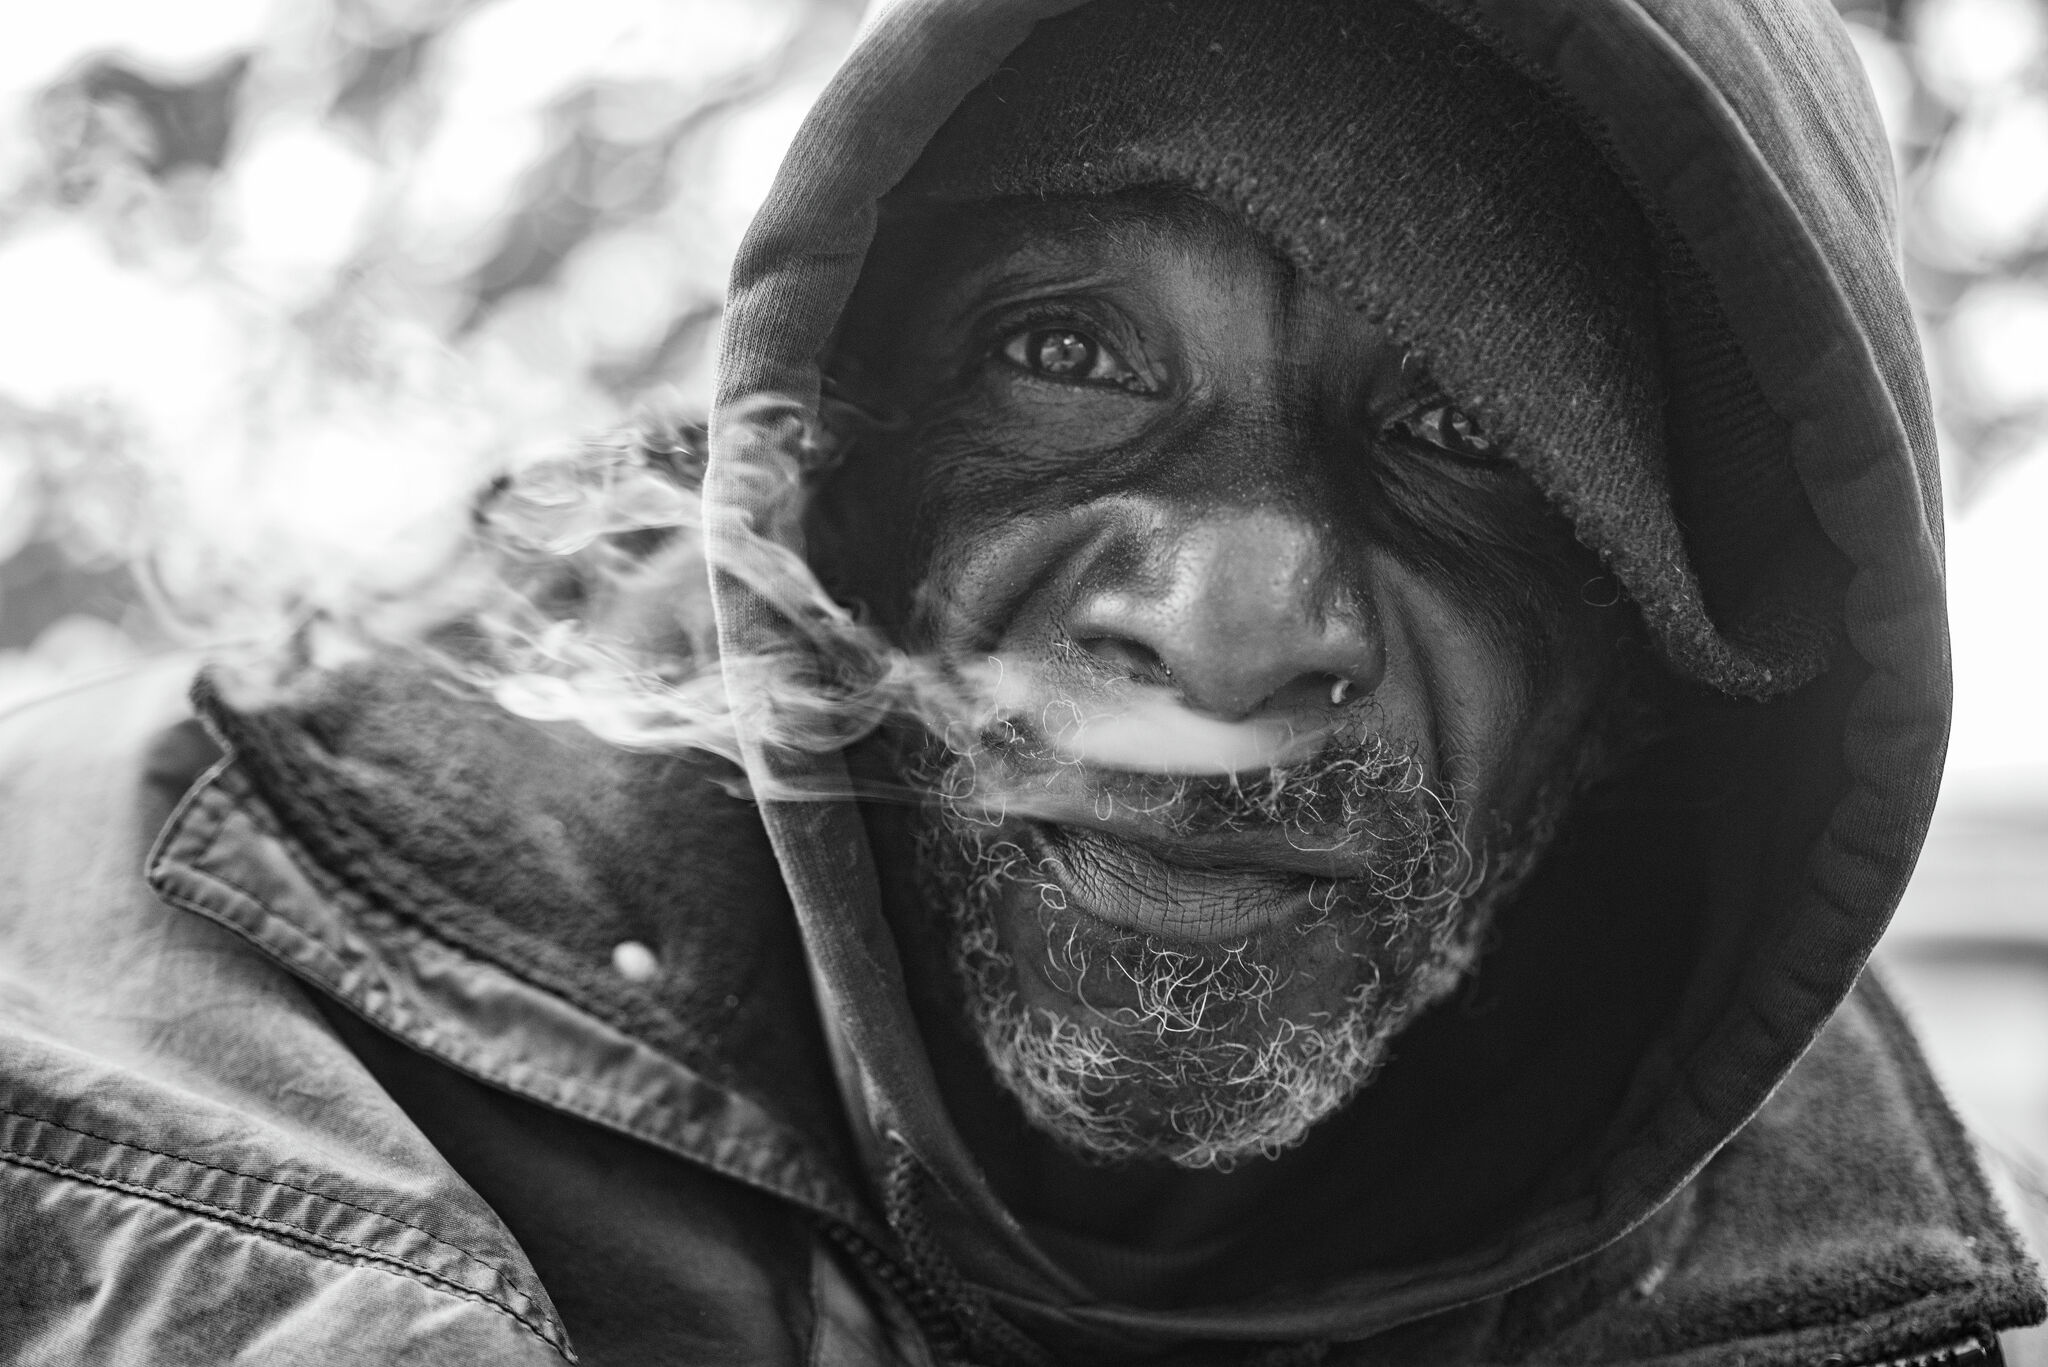 SF photographer takes vivid portraits of everyday residents